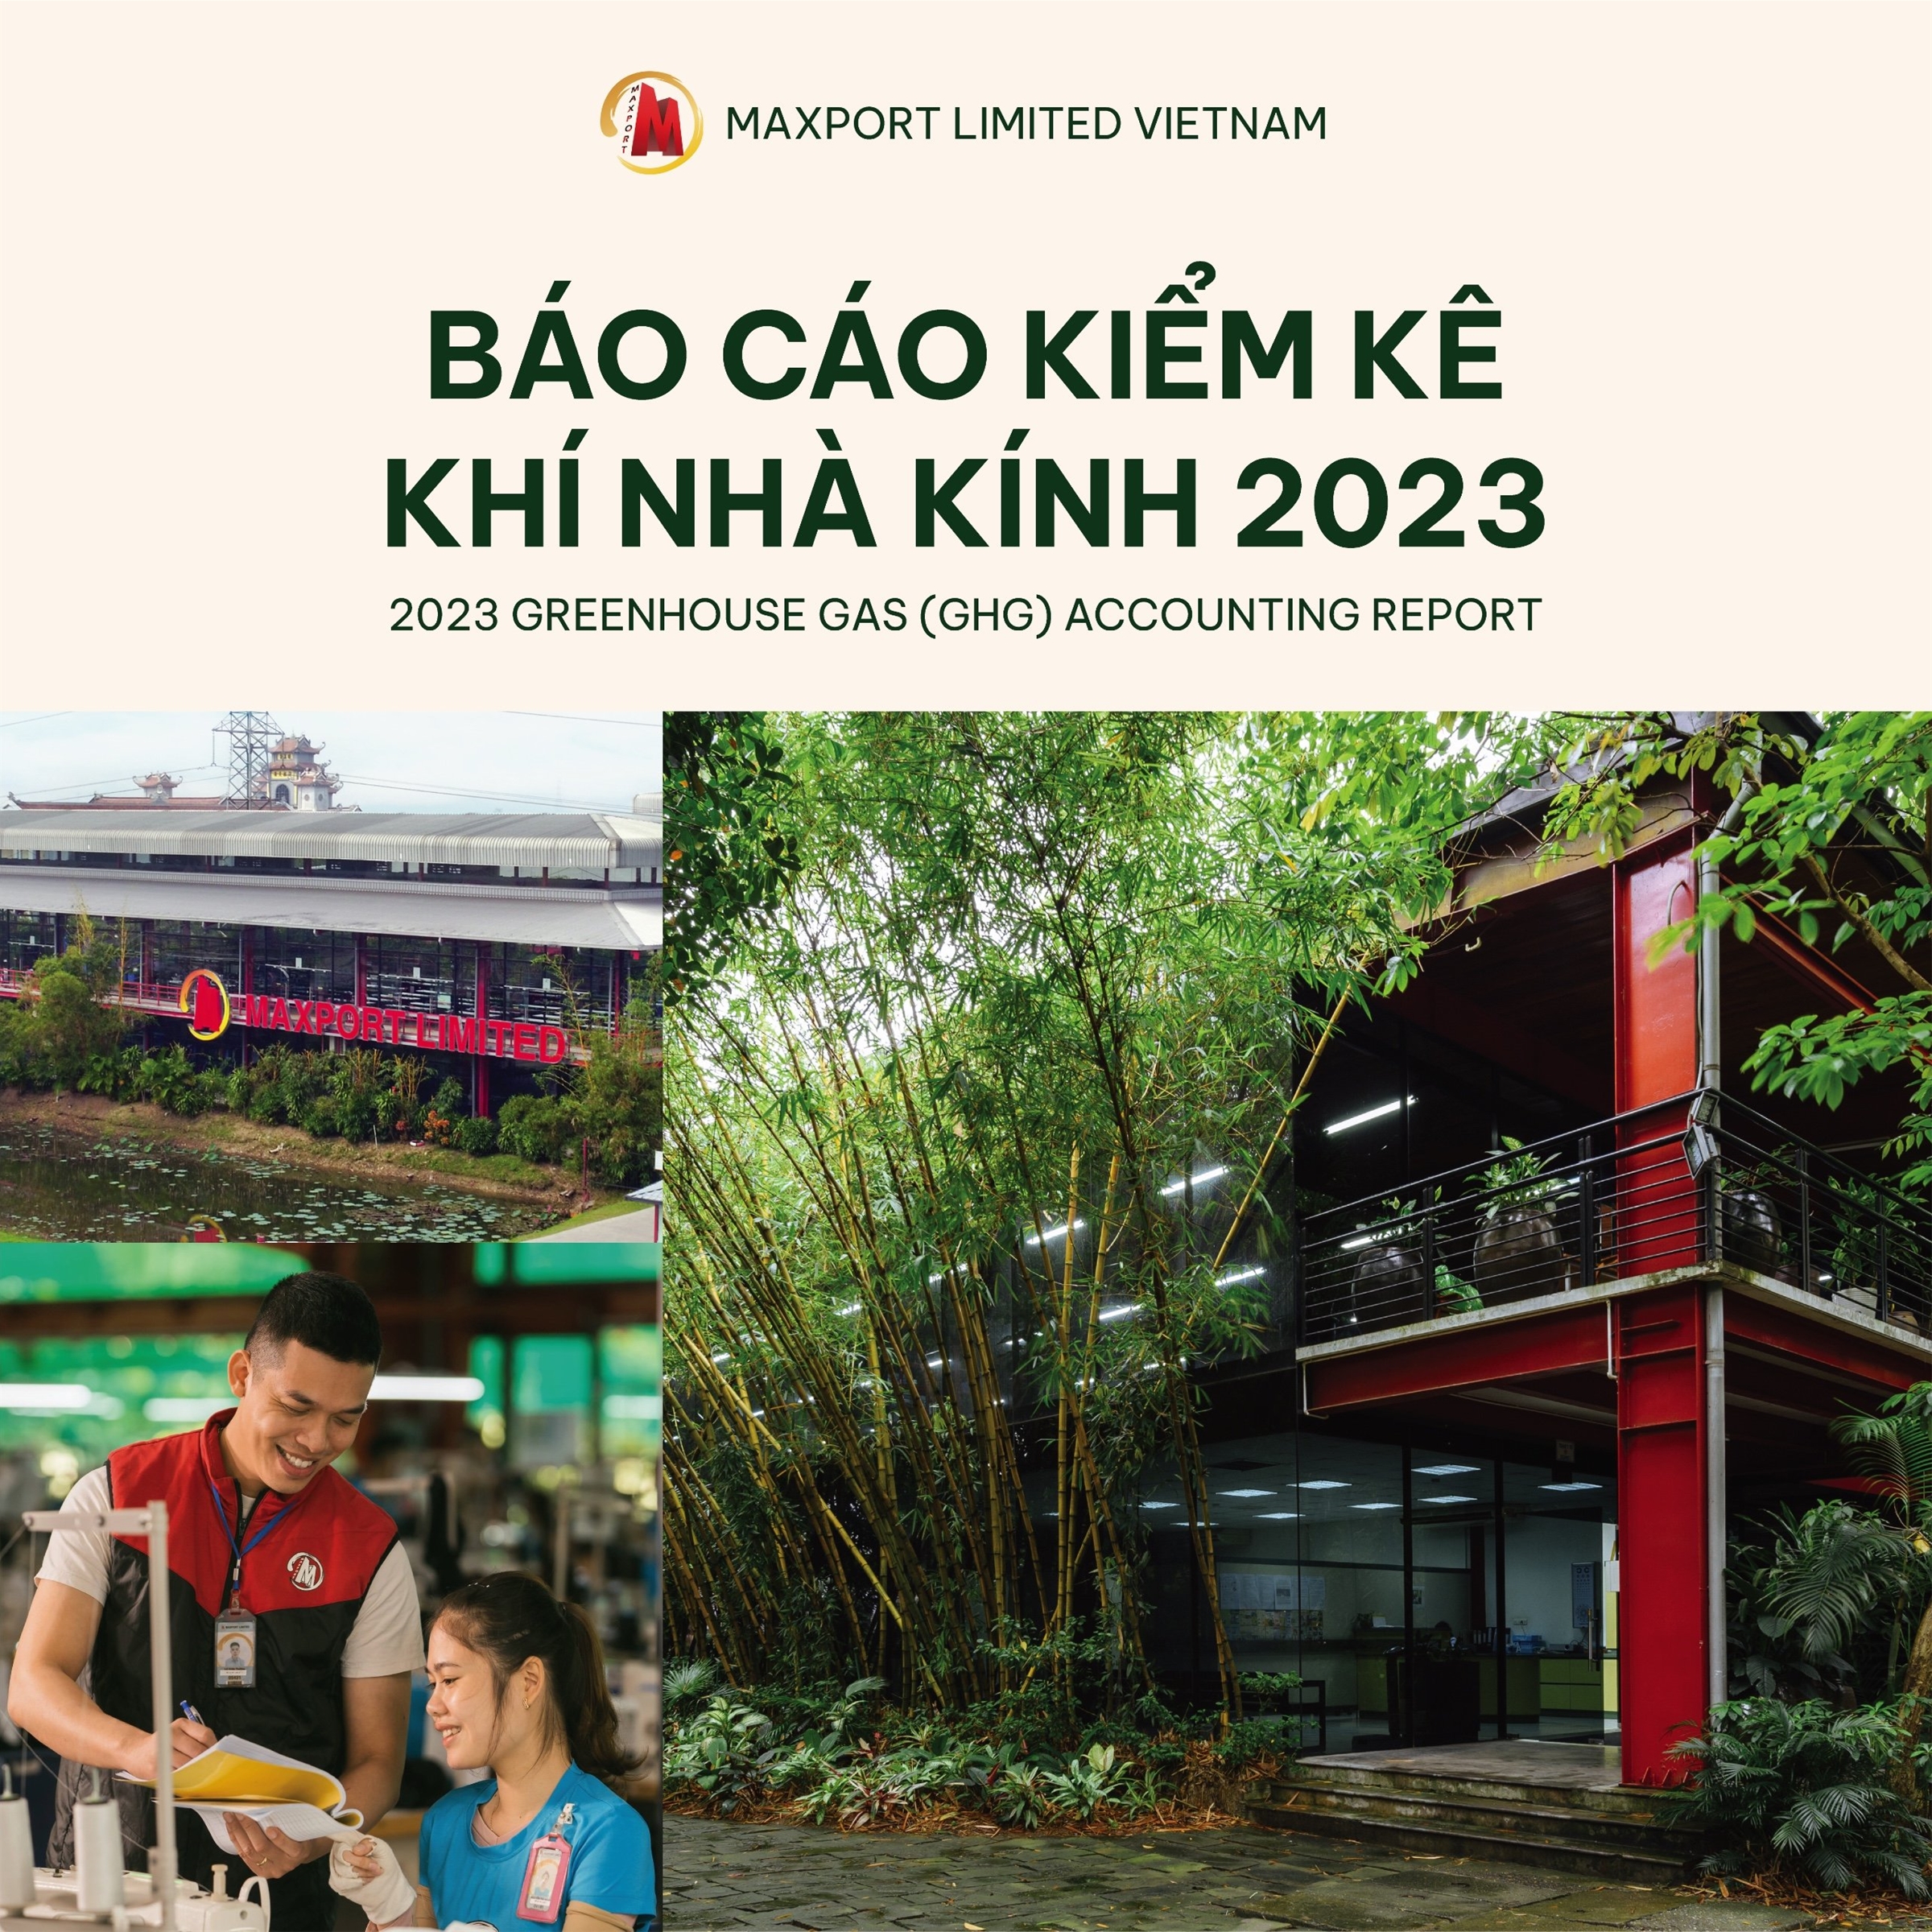 2023 GHG Accounting Report